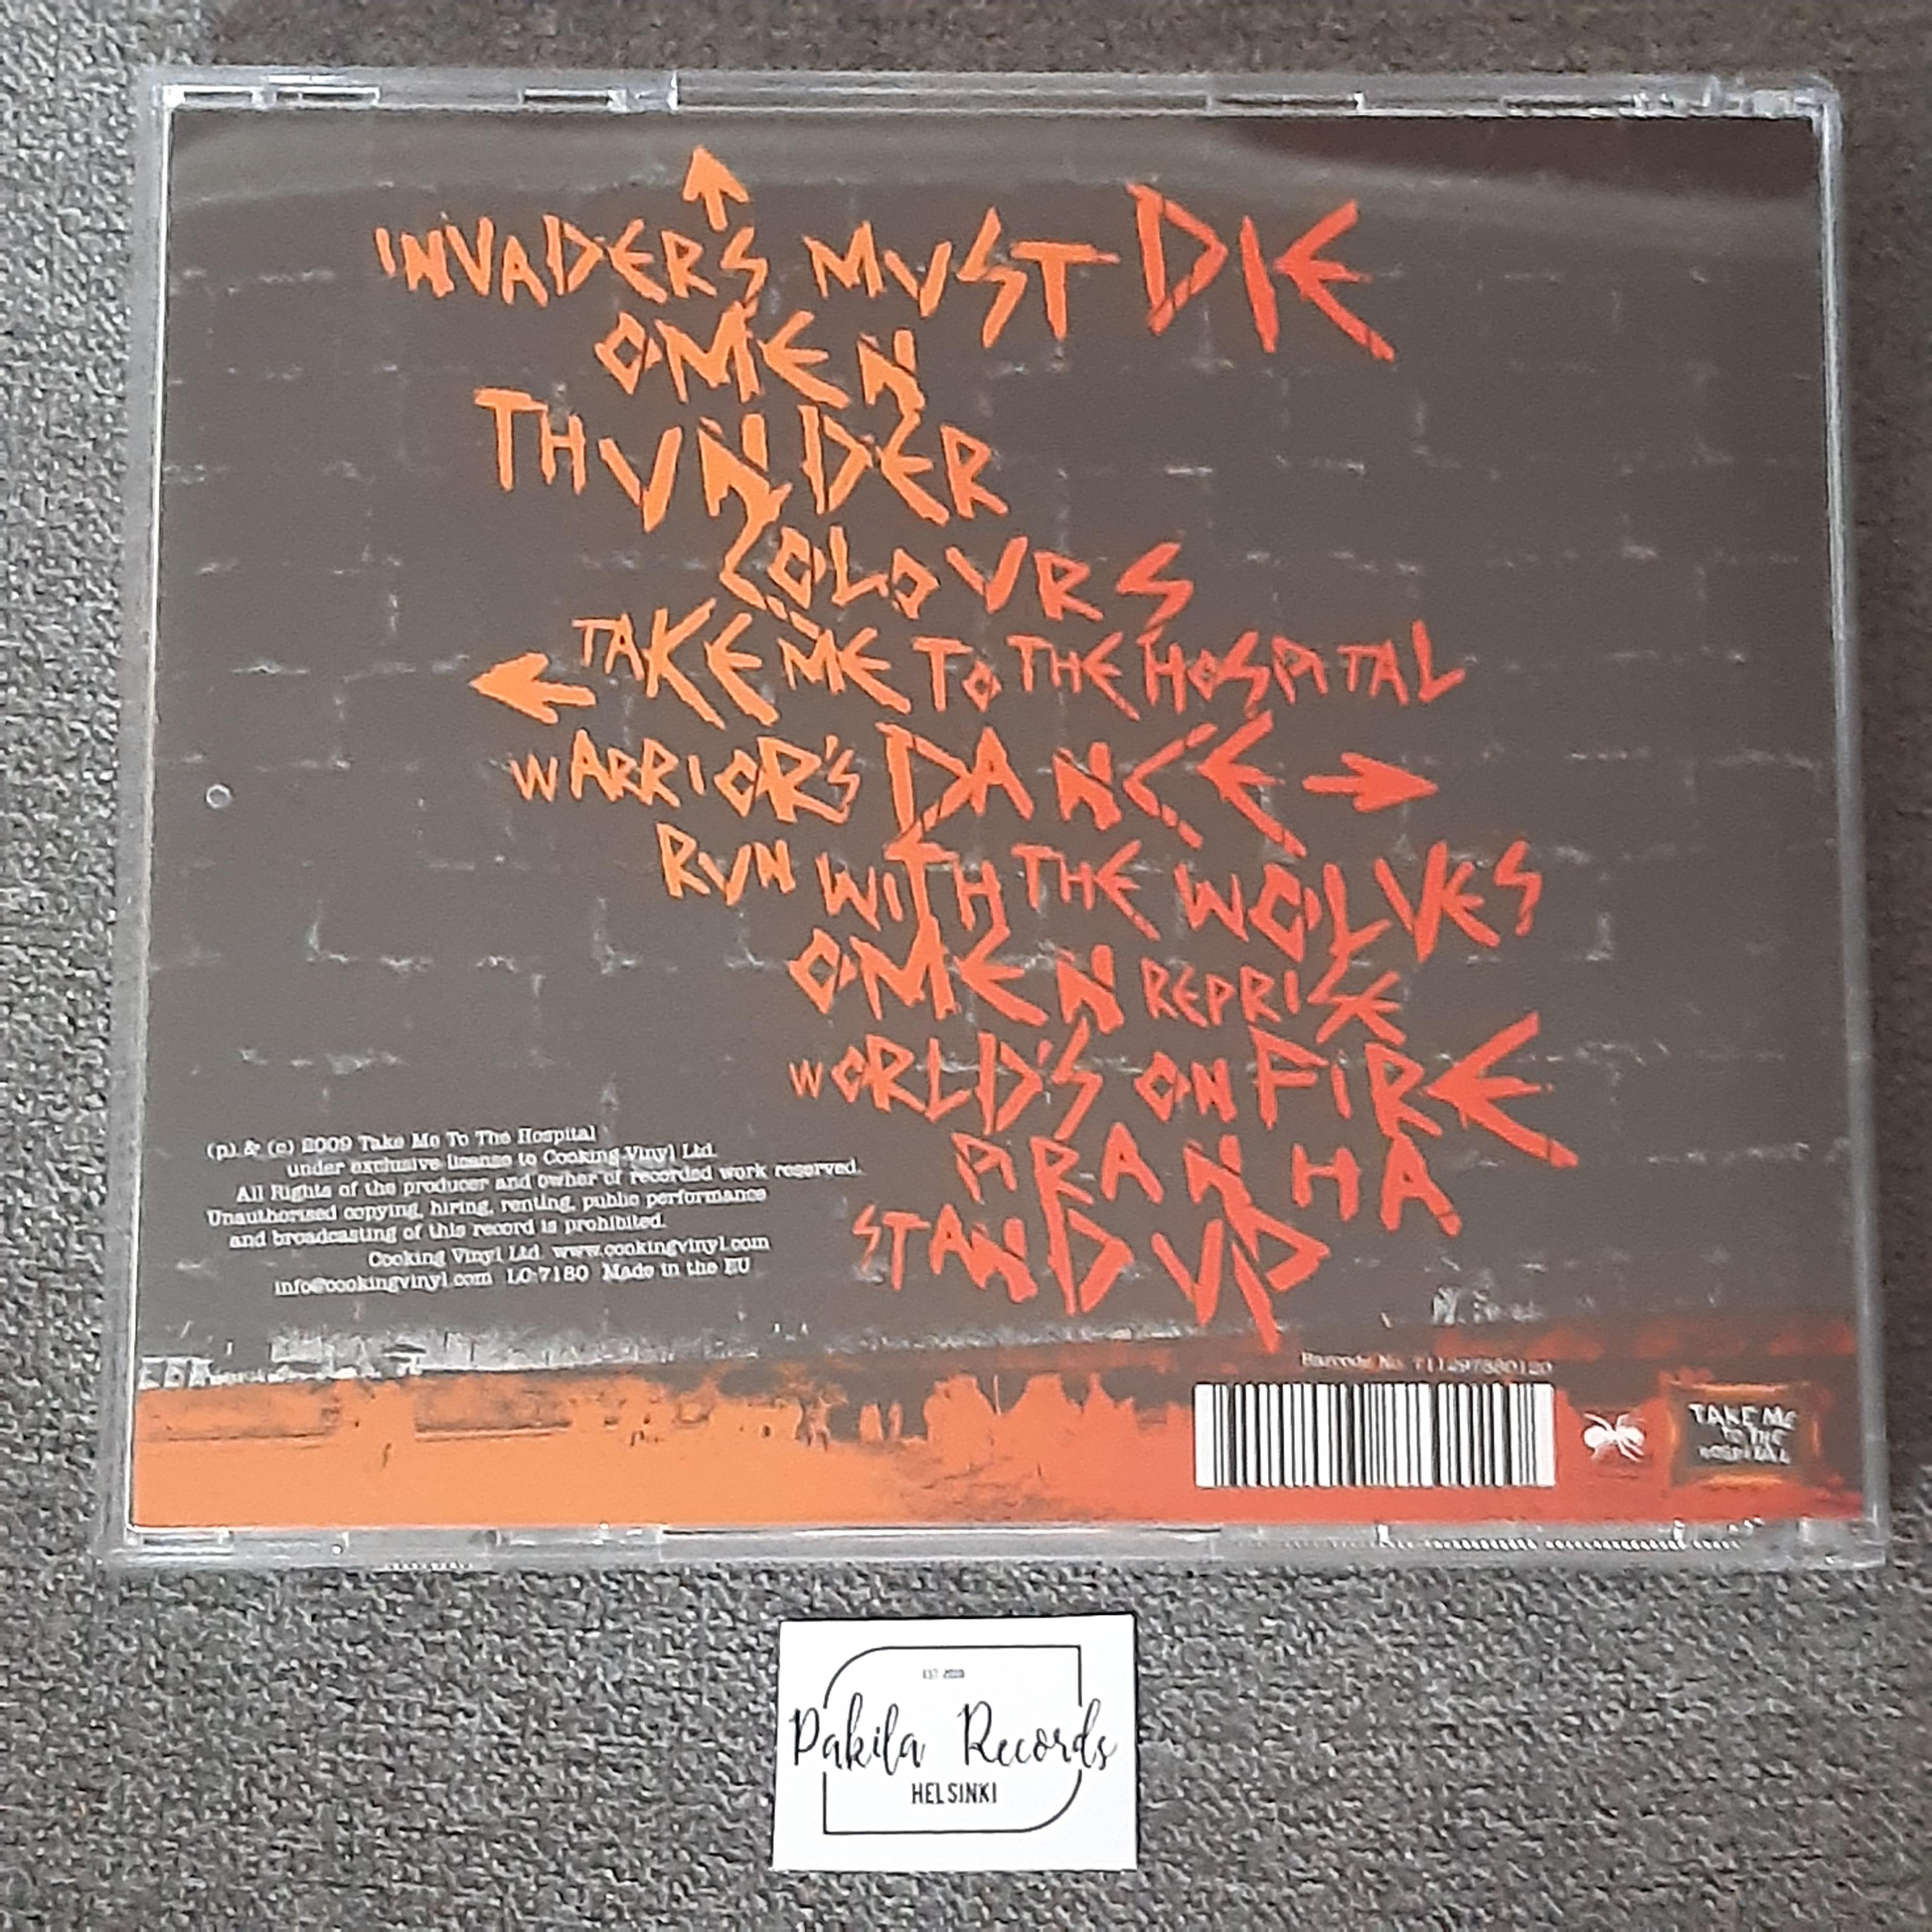 The Prodigy - Invaders Must Die - CD (käytetty)